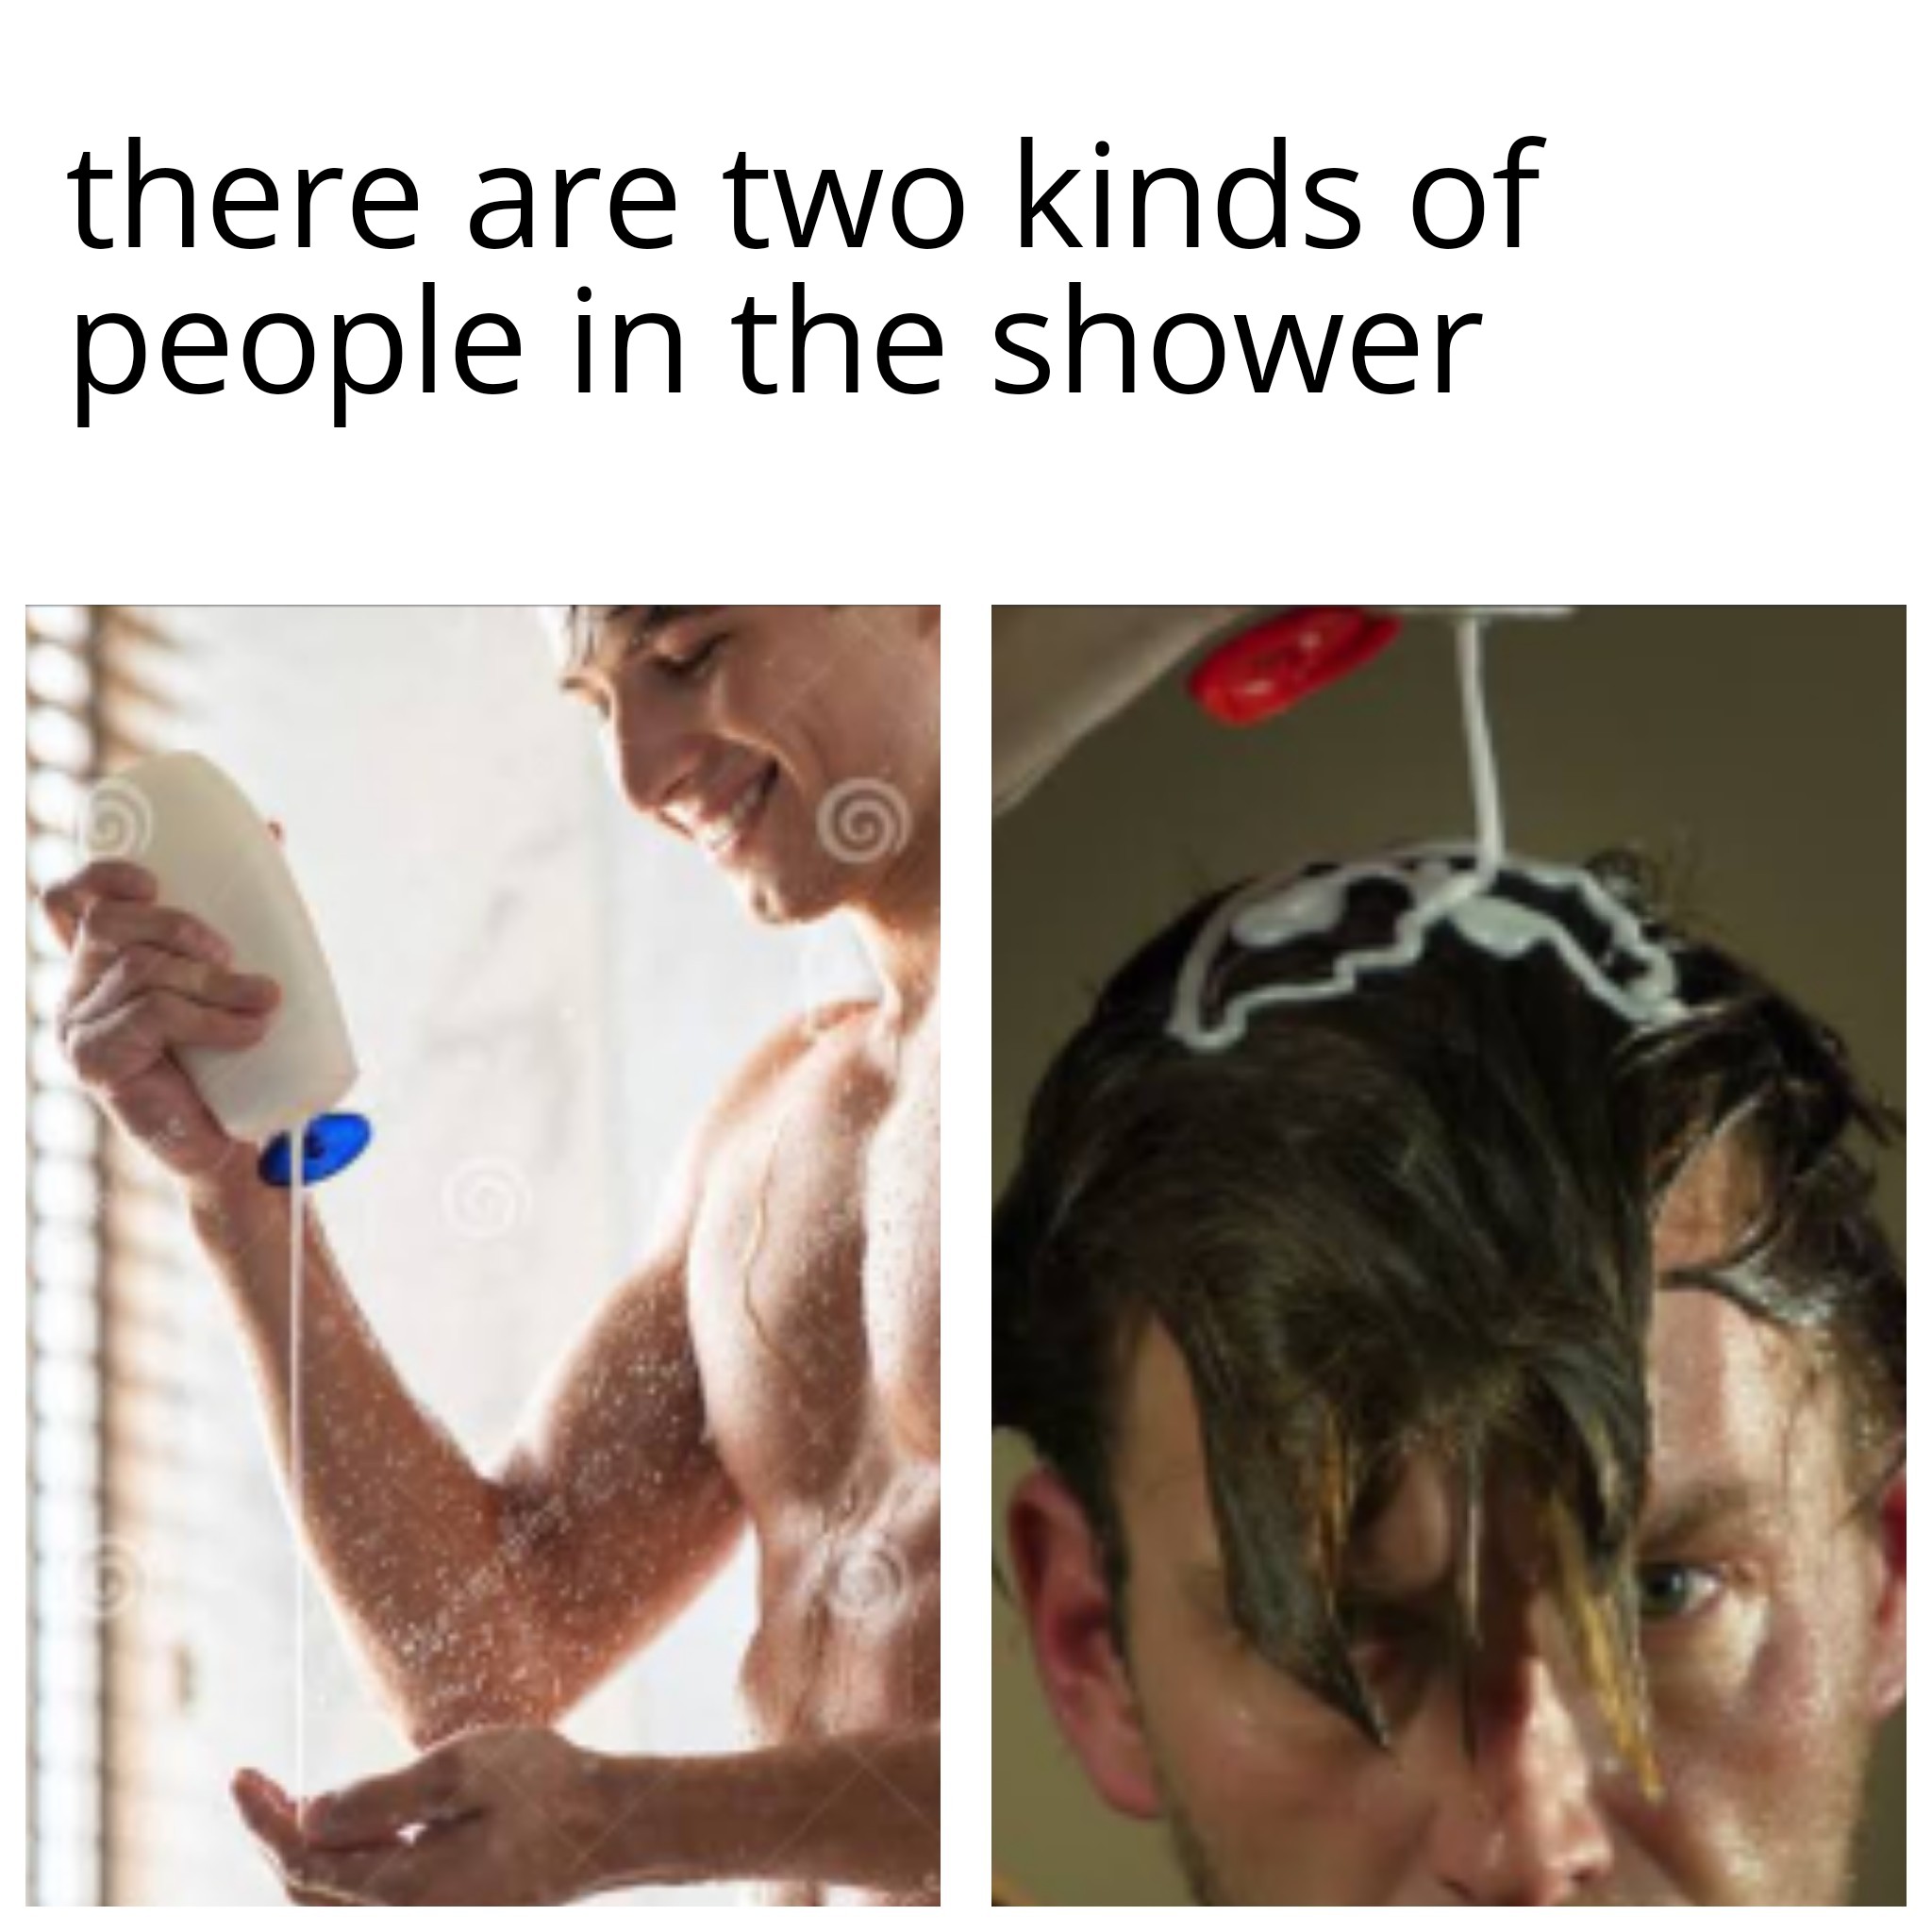 shoulder - there are two kinds of people in the shower